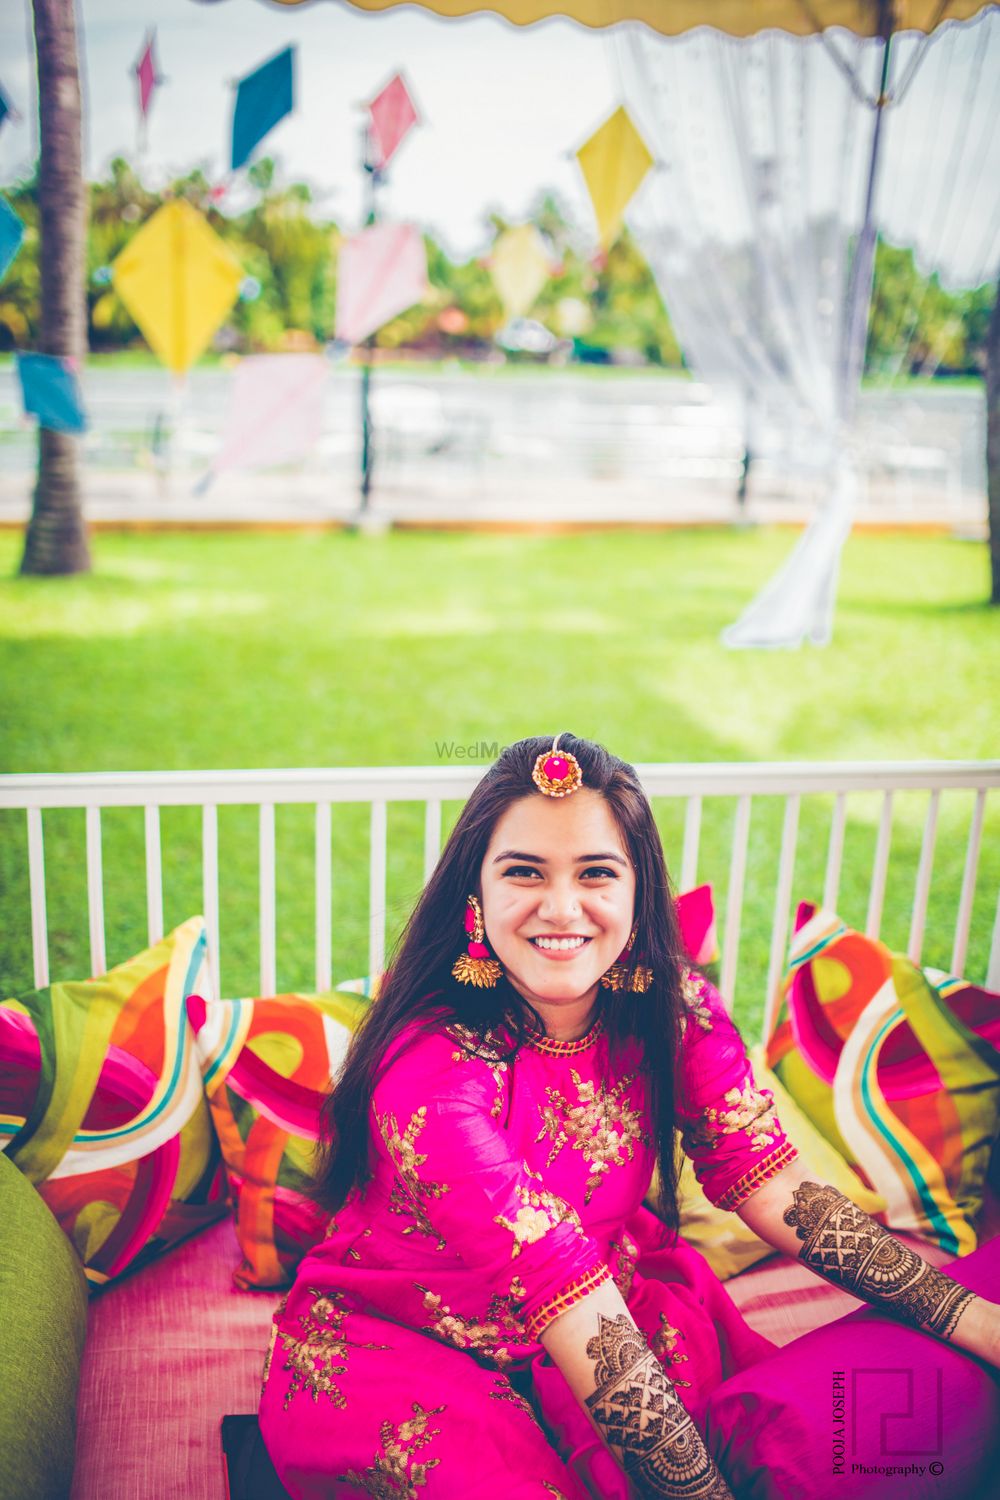 Photo of Bride on mehendi day in pink outfit